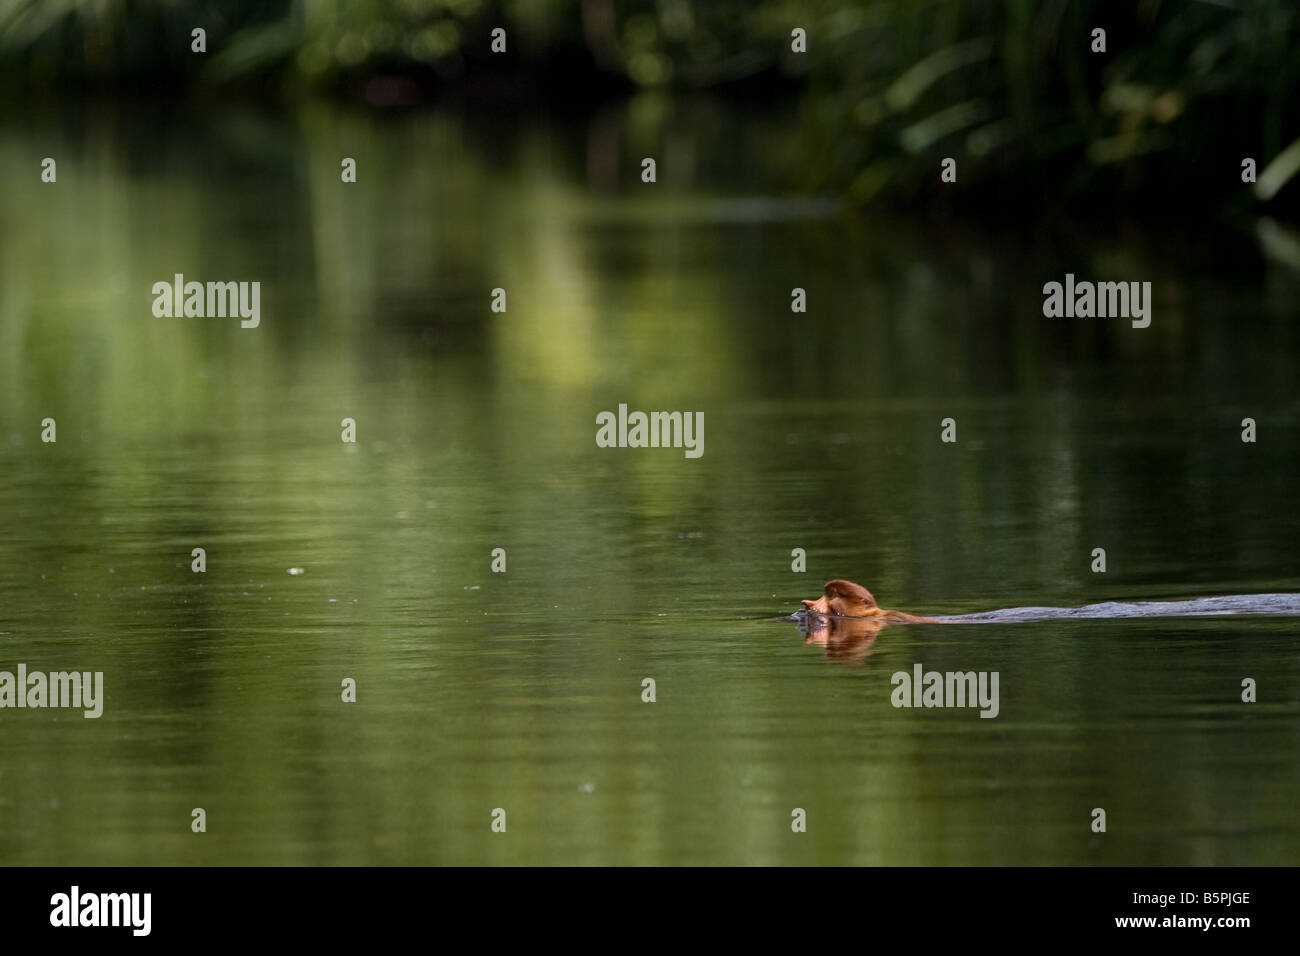 Adult proboscis monkey swimming in the Sekonyer River in Tanjung Puting NP Borneo (Image 2 of 2) Stock Photo